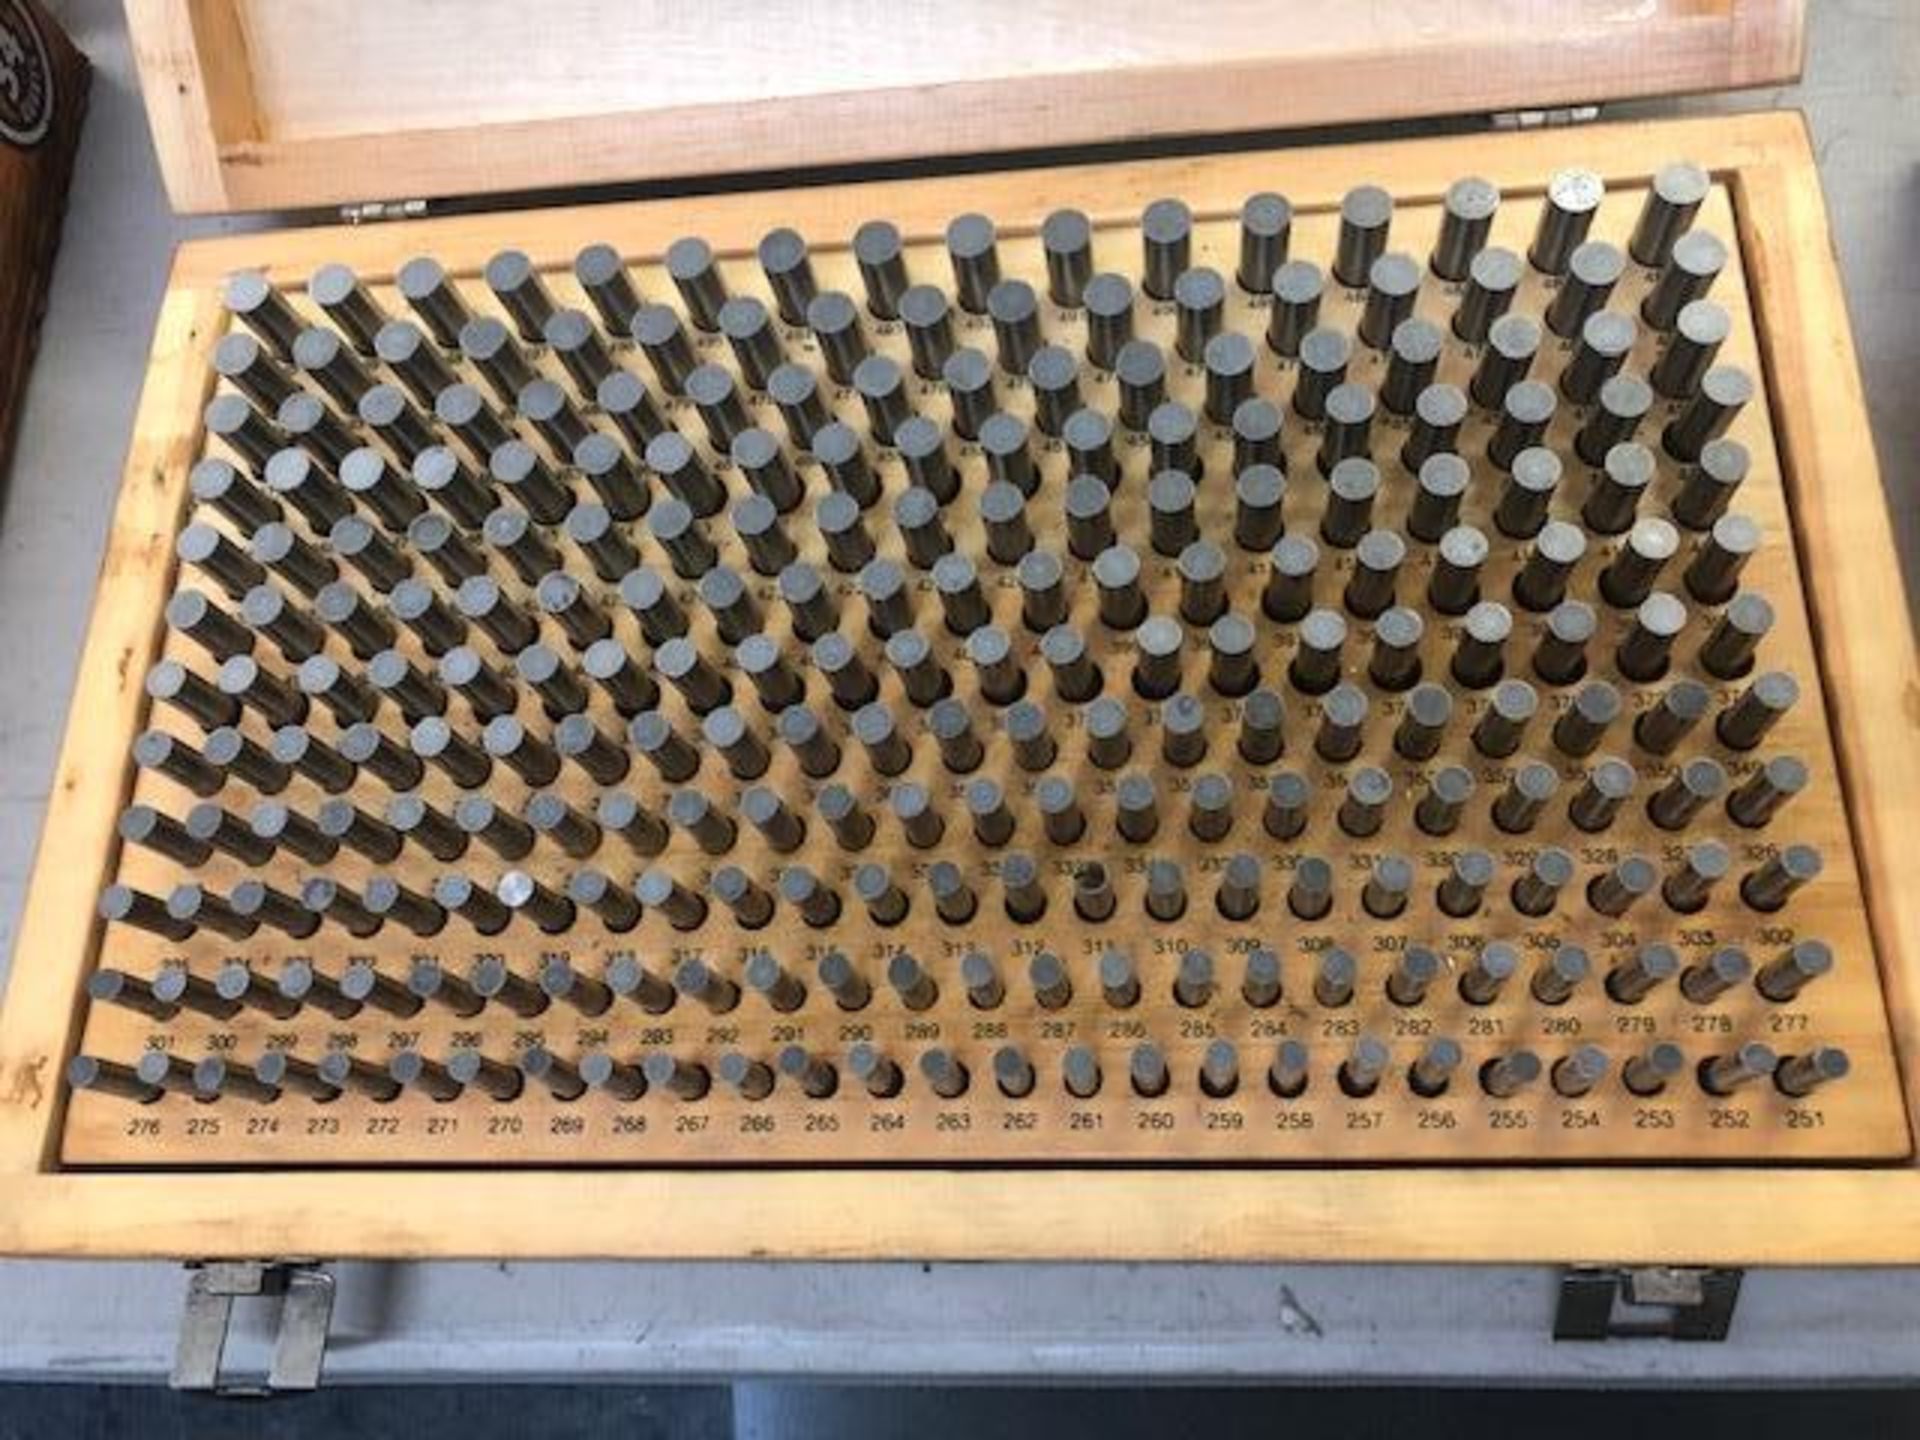 Meyer M-2 pin gage set in wooden box (.251-.500) - Image 2 of 2